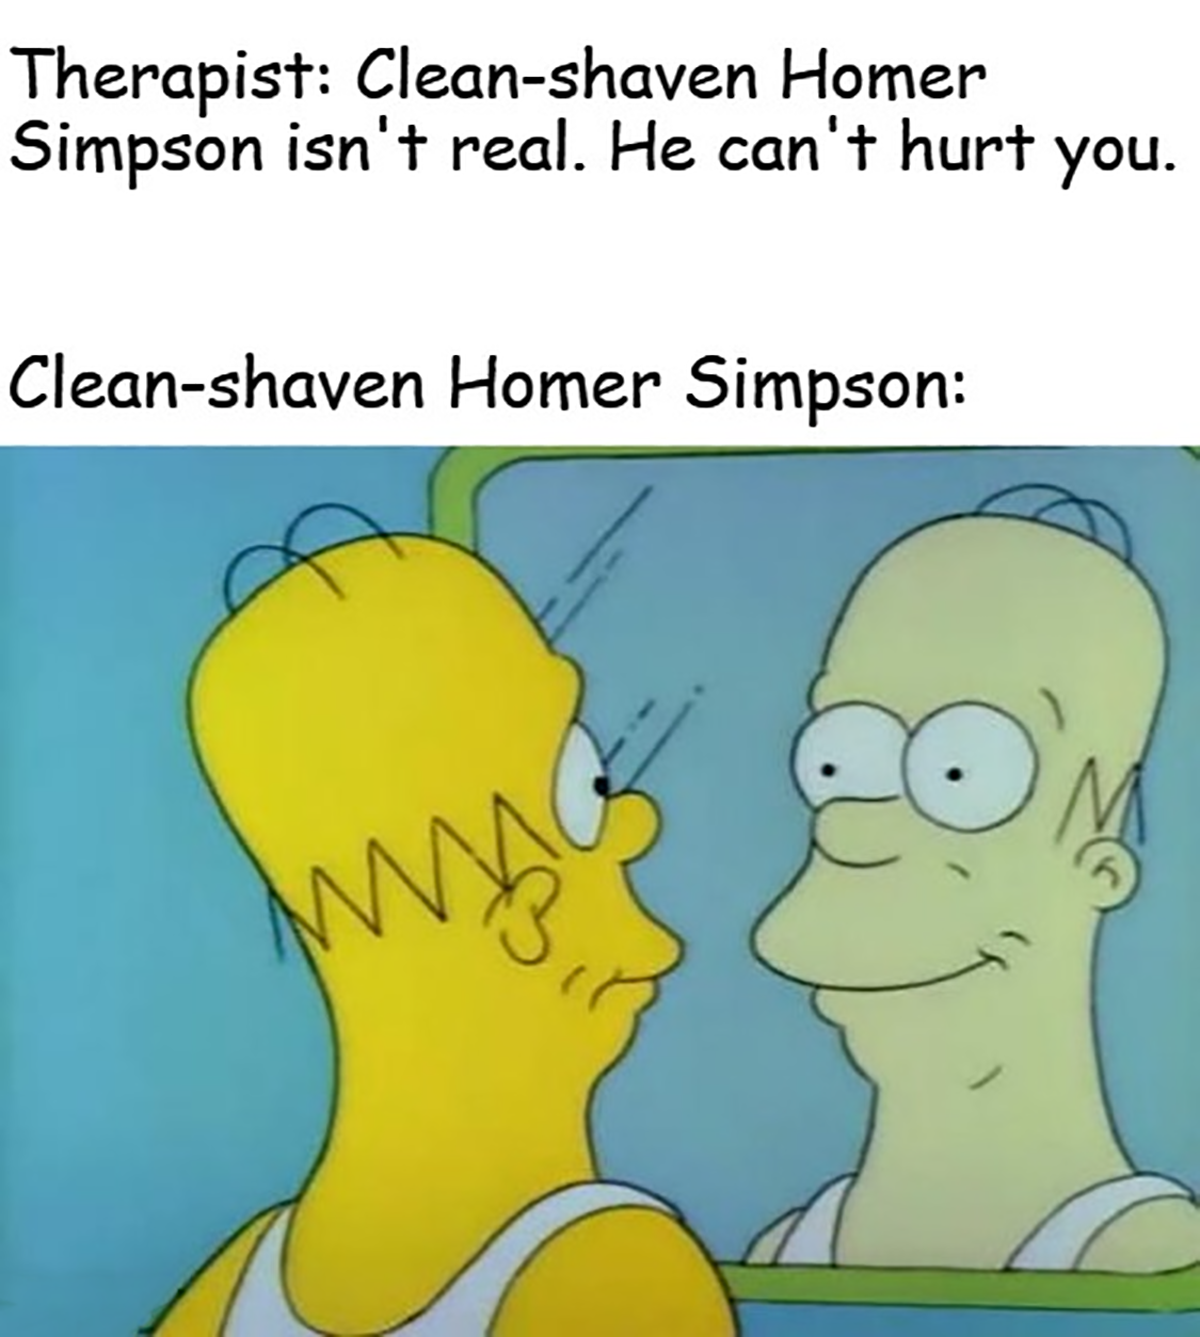 monday memes - cartoon - Therapist Cleanshaven Homer Simpson isn't real. He can't hurt you. Cleanshaven Homer Simpson